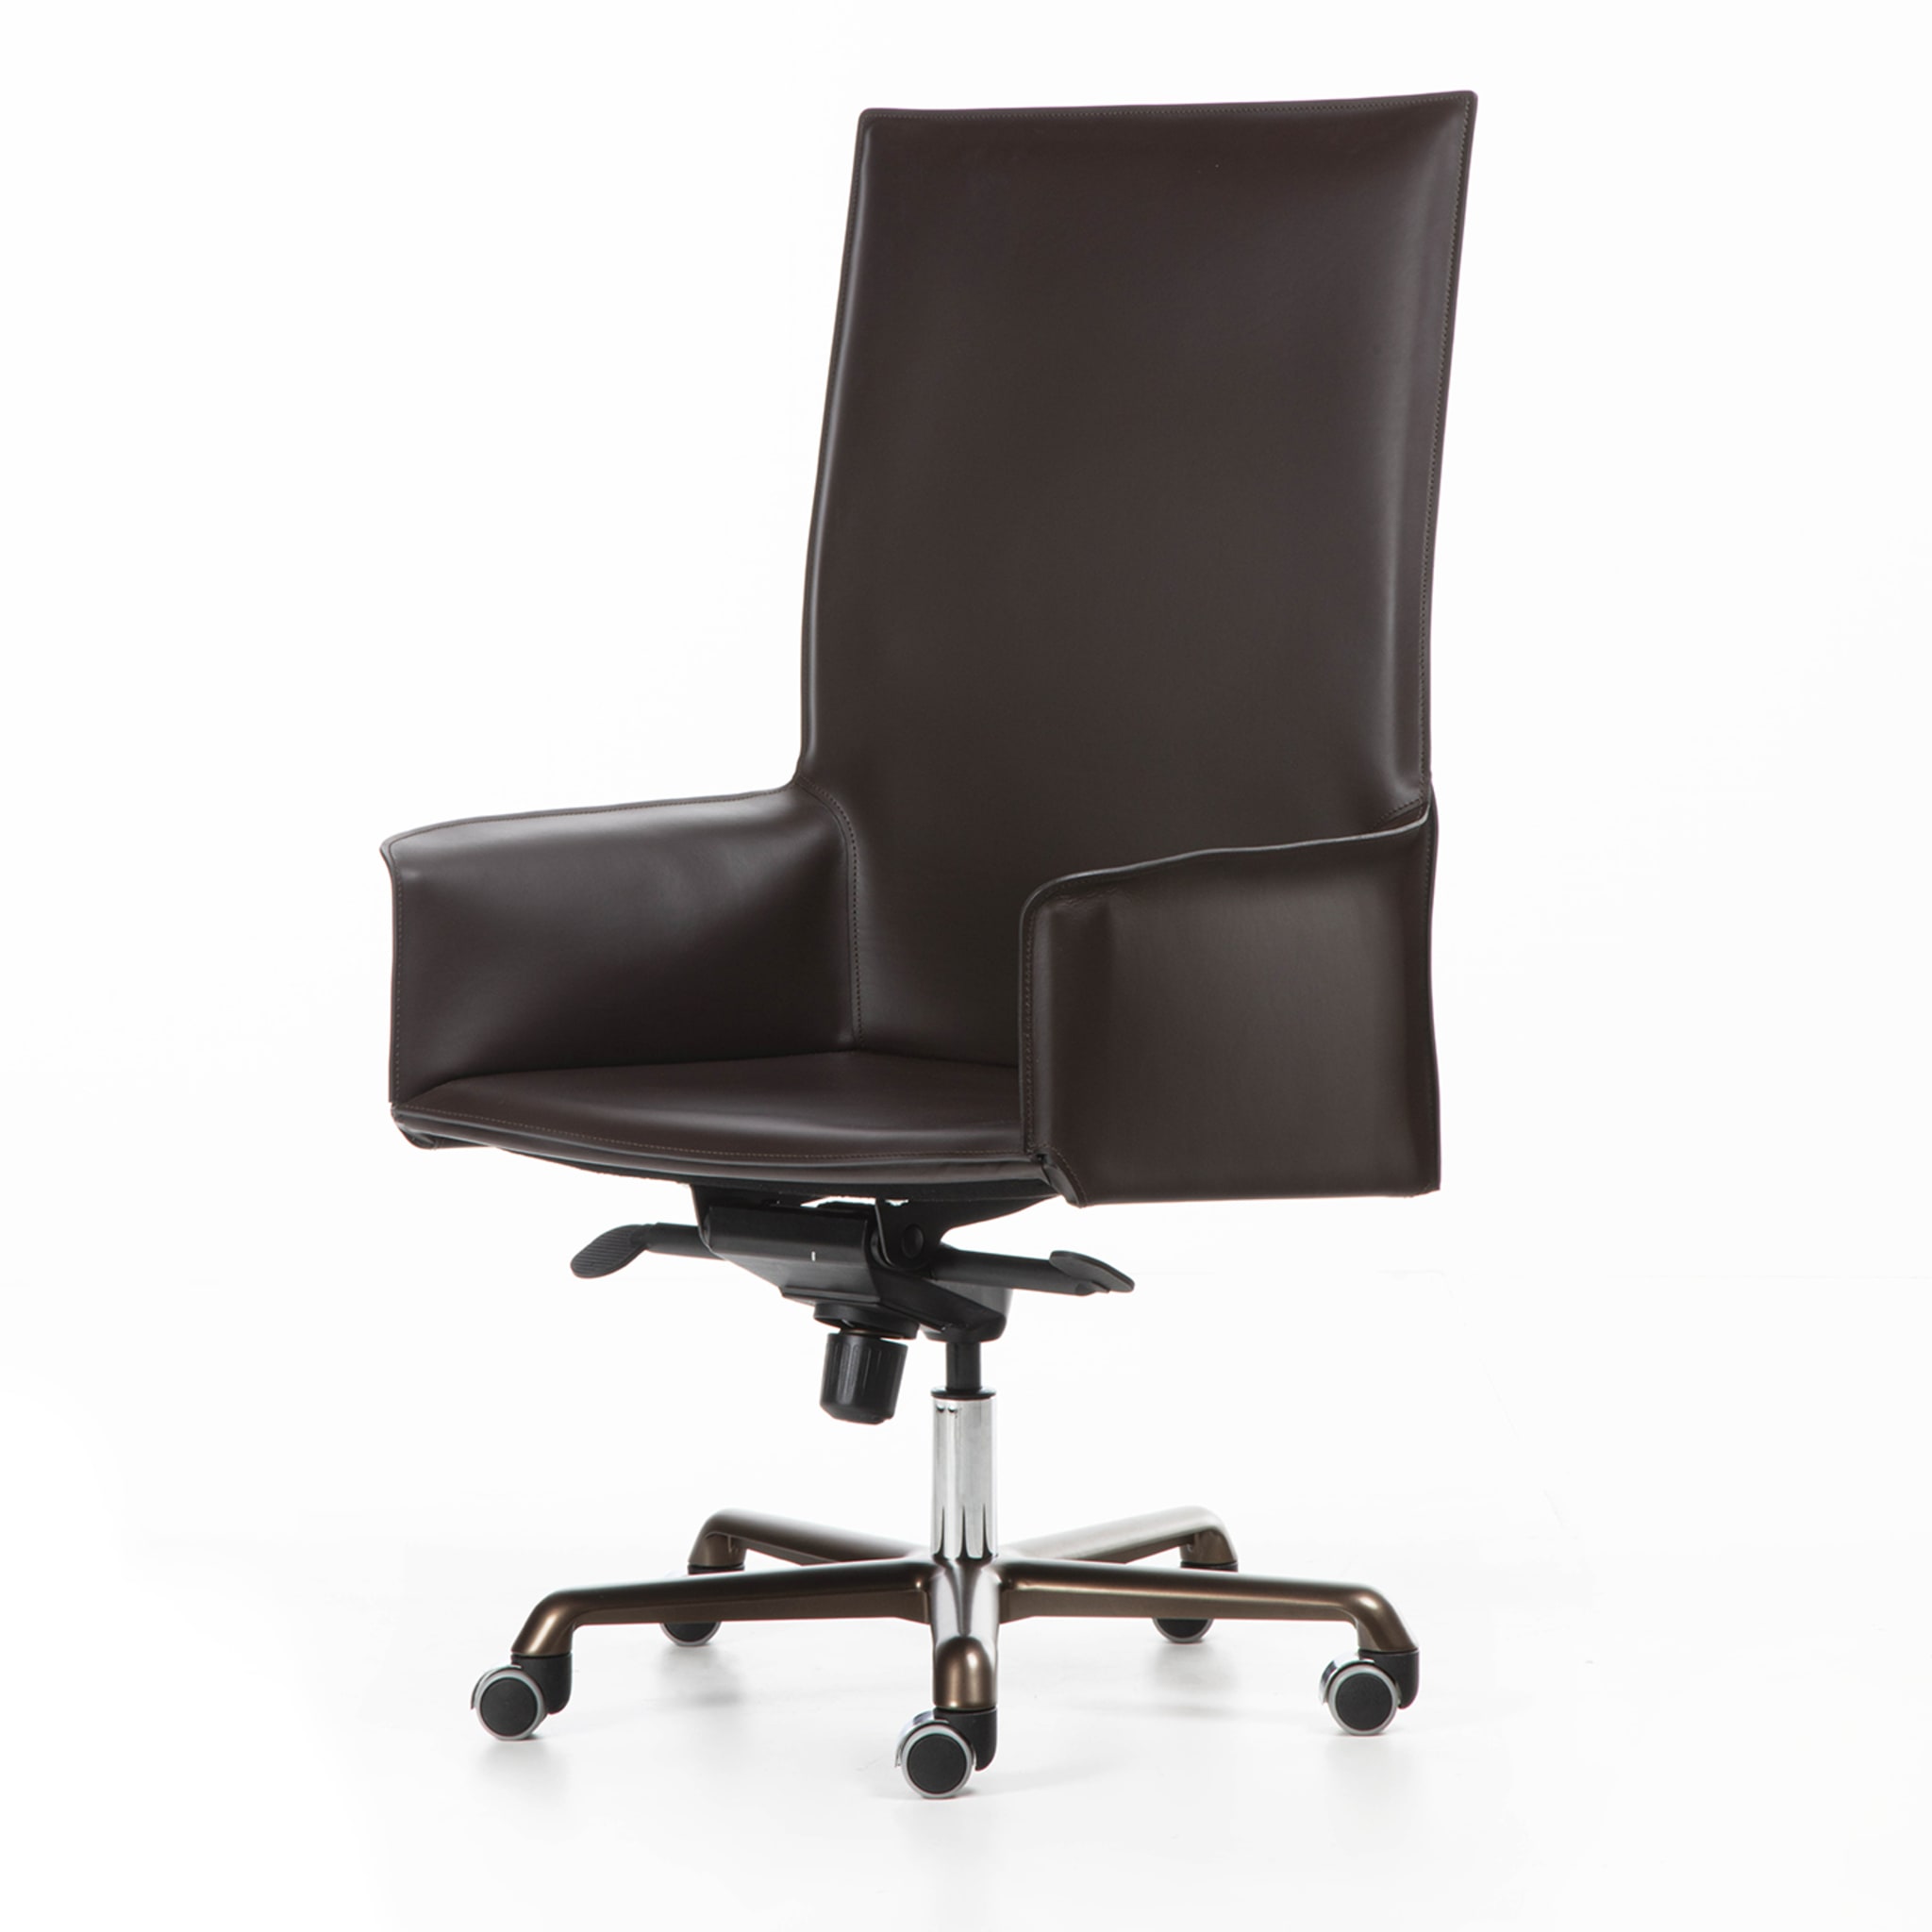 Pasqualina Swivel President Chair by Grassi&Bianchi and RedCreative - Alternative view 3